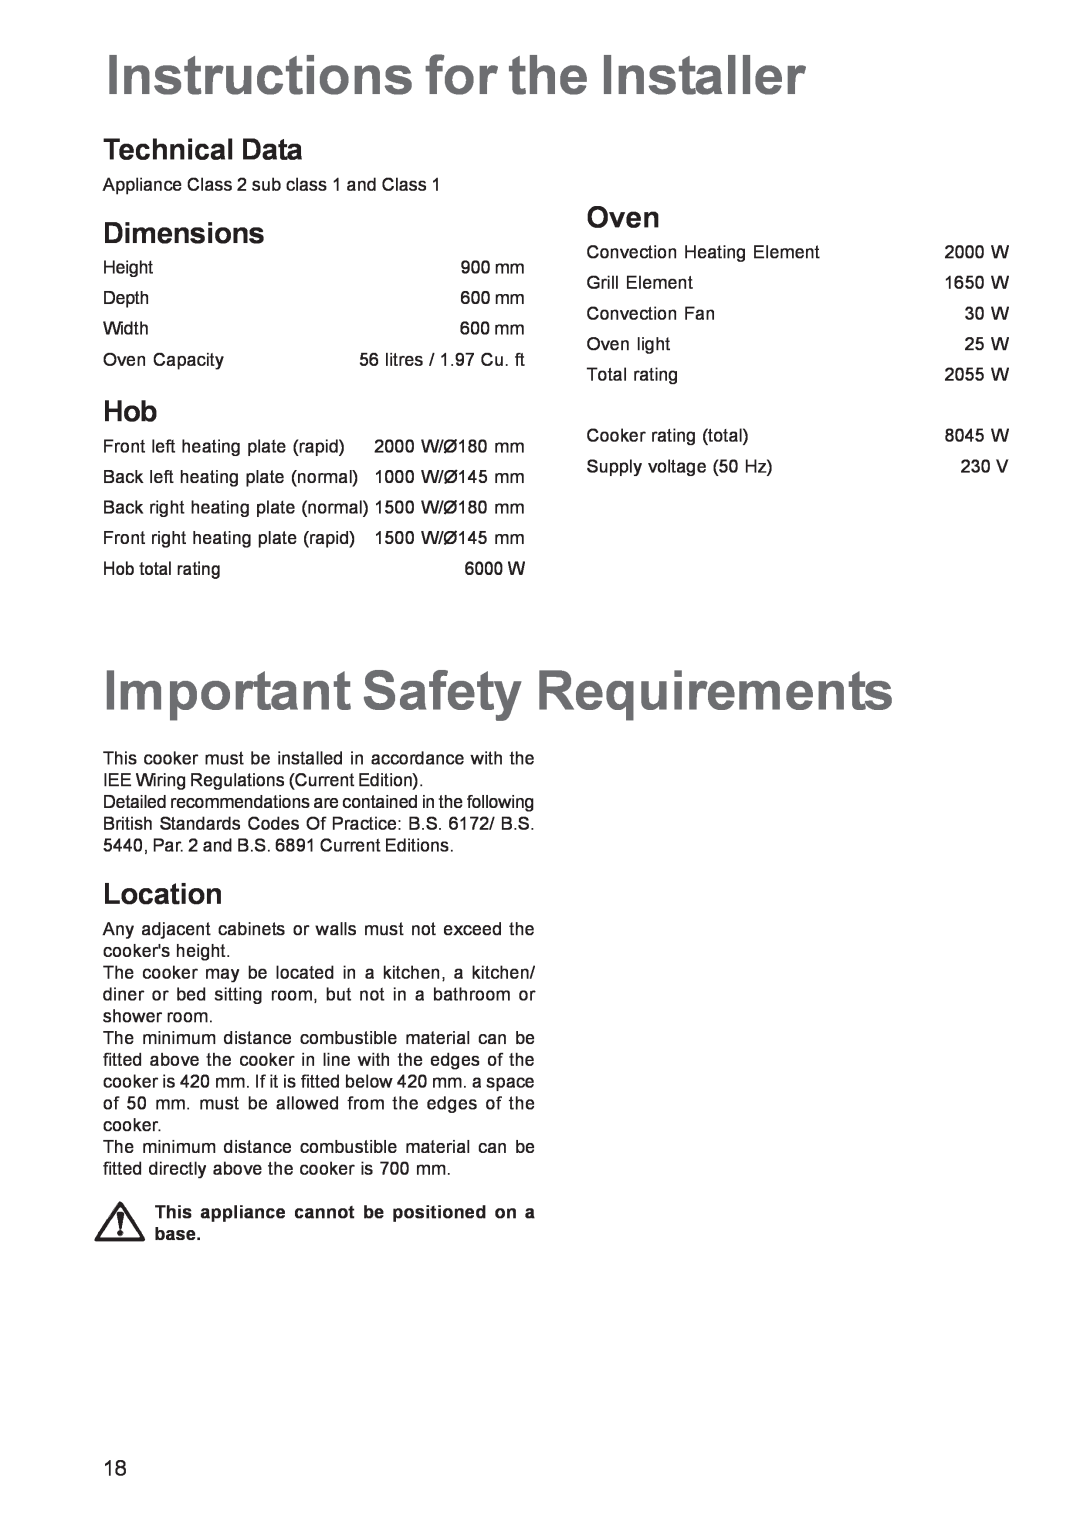 Zanussi ZCE 641 Instructions for the Installer, Important Safety Requirements, Technical Data, Dimensions, Oven, Location 